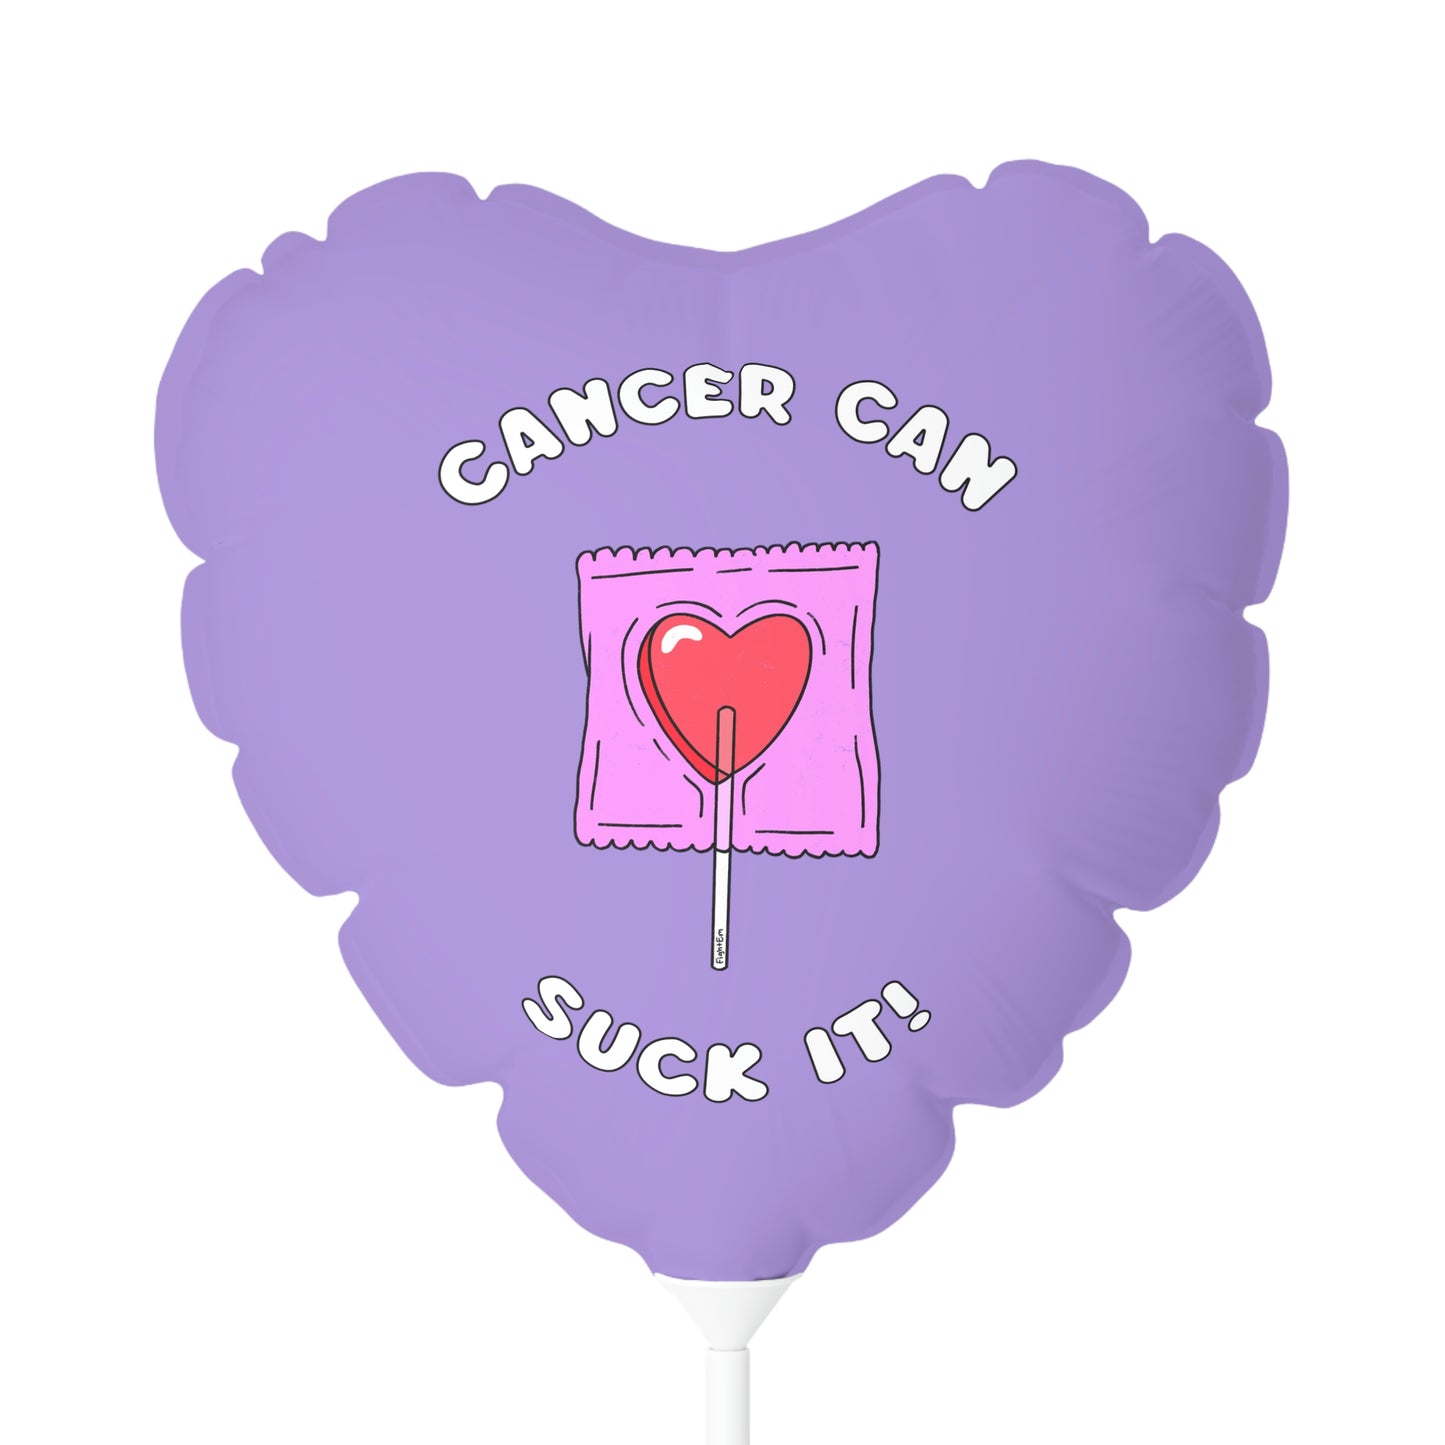 Cancer Can Suck It Balloon (Round-shaped), 11"